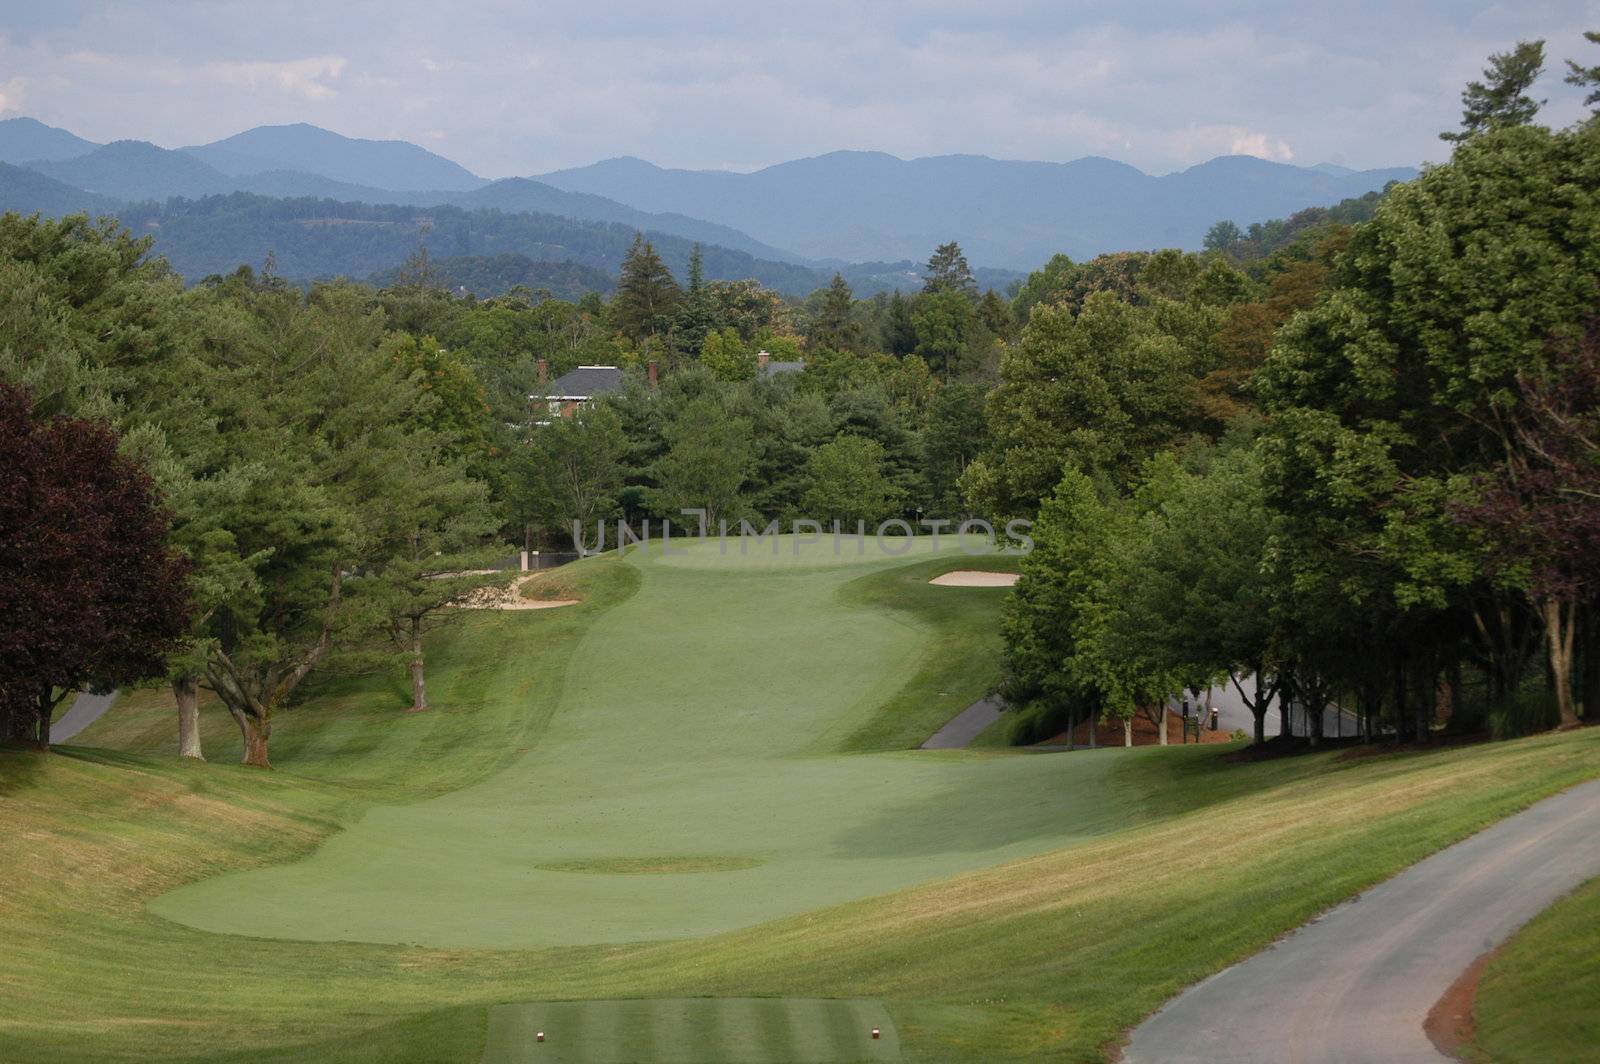 A long golf fairway in the North Carolina mountains